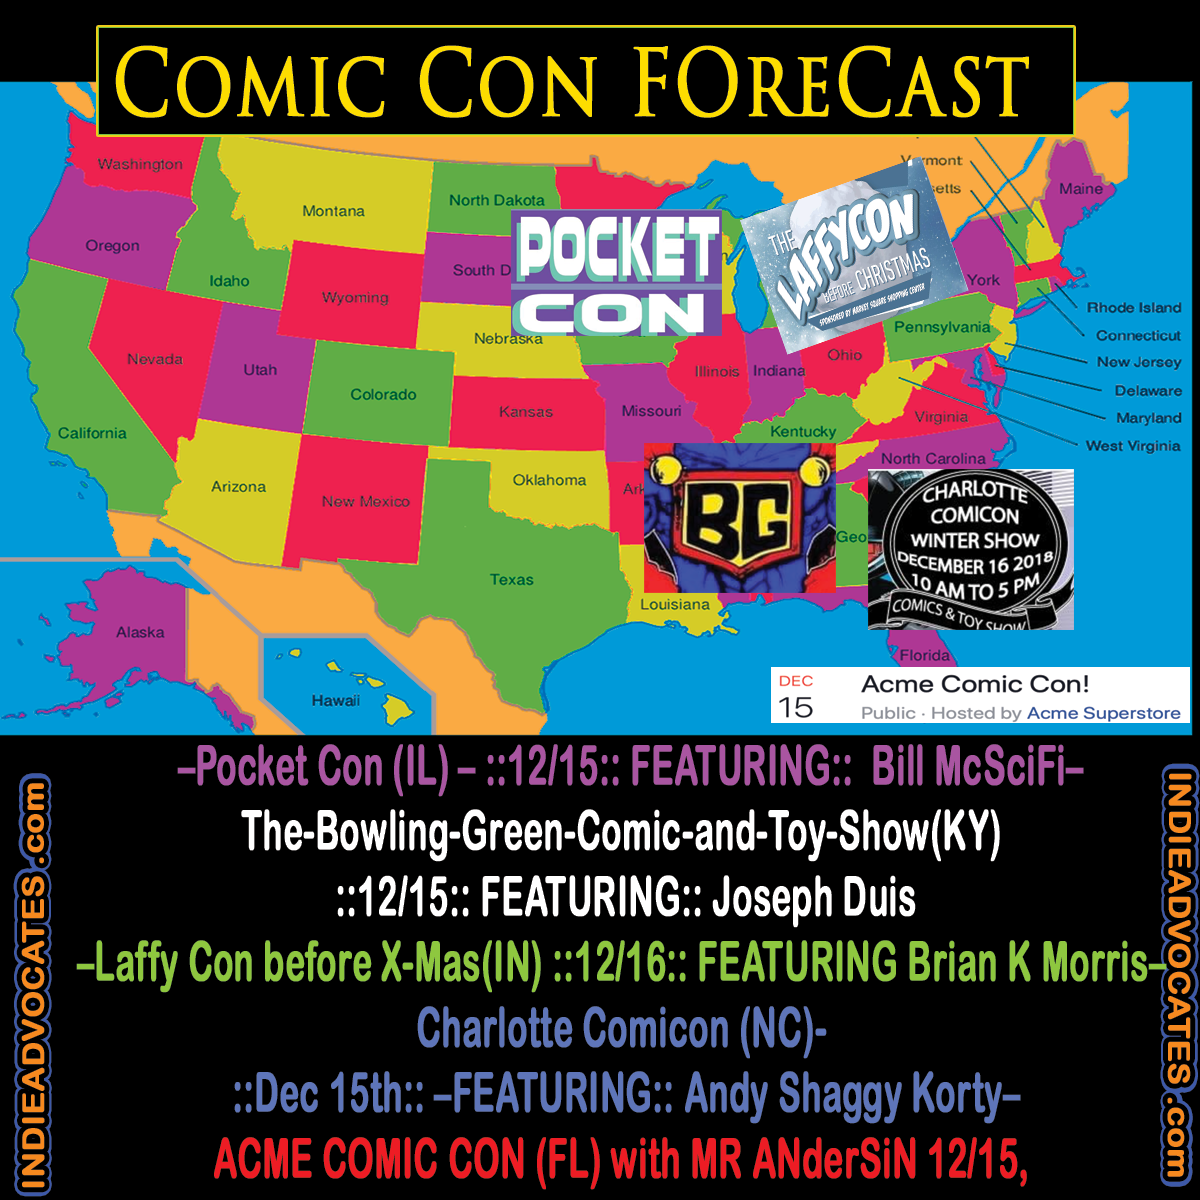 THE COMIC CON HIGHWAY WEEKEND FORECAST:: ::Dec13th-16th::  ACME COMIC CON (FL) with MR ANderSiN 12/15,  –Laffy Con before X-Mas (IN)  ::12/16:: FEATURING Brian K Morris– Charlotte Comicon- (NC) ::Dec 15th:: –FEATURING:: Andy Shaggy Korty– –Pocket Con  (IL)- ::12/15:: FEATURING:: Bill McSciFi  –The-Bowling-Green-Comic-and-Toy-Show (KY)::12/15:: FEATURING:: Joseph Duis